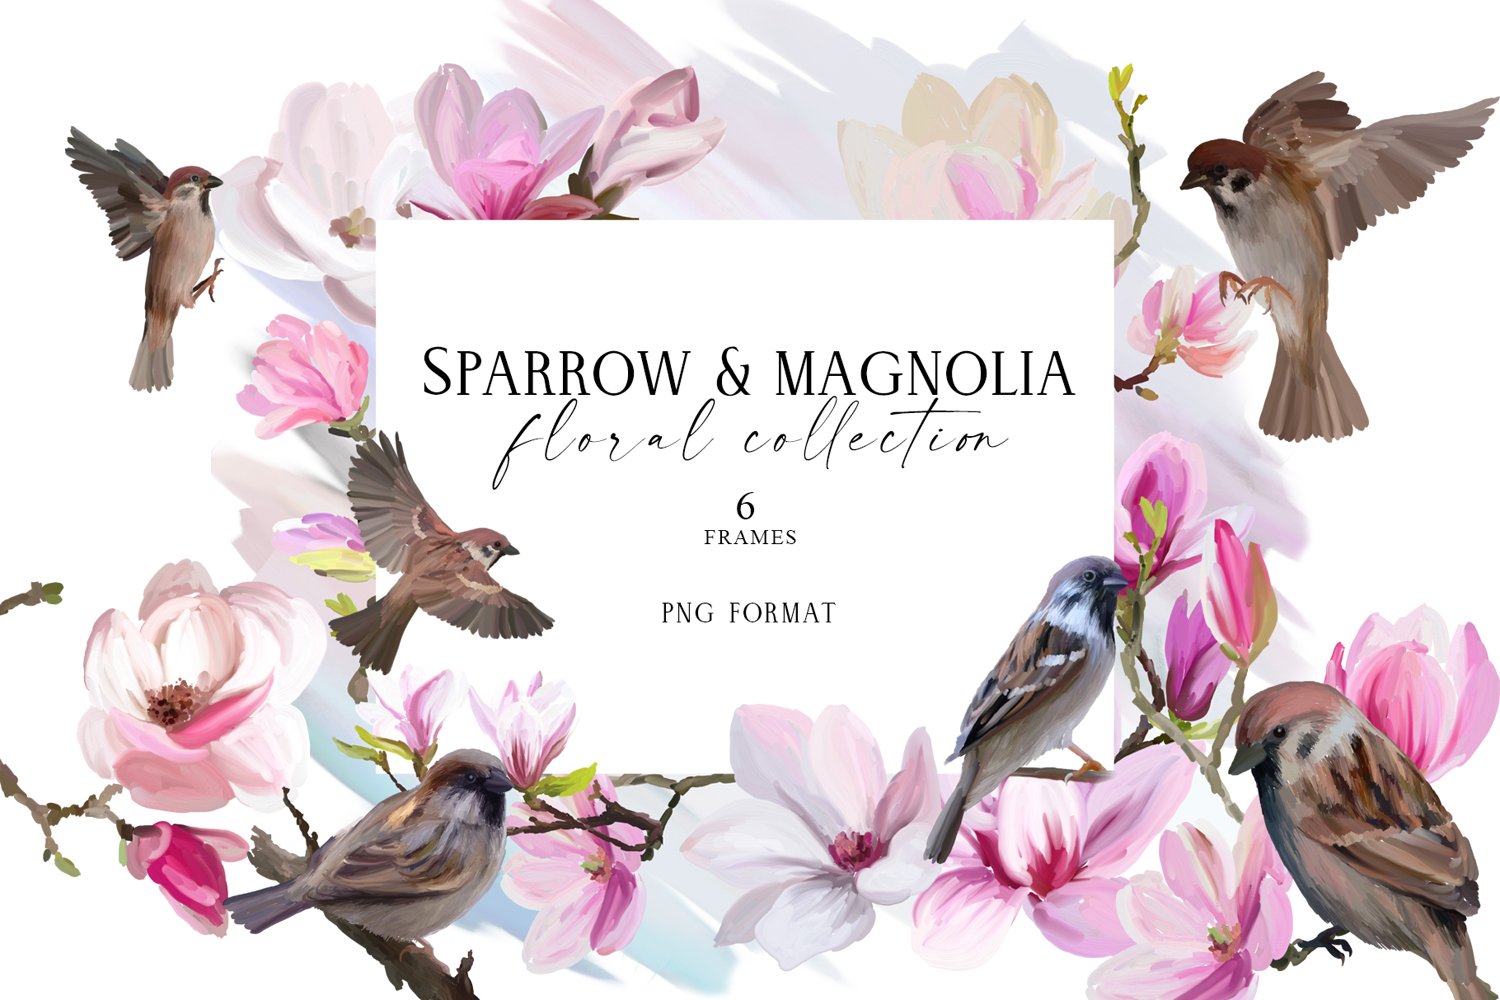 Cover image of Sparrow and magnolia bundle.